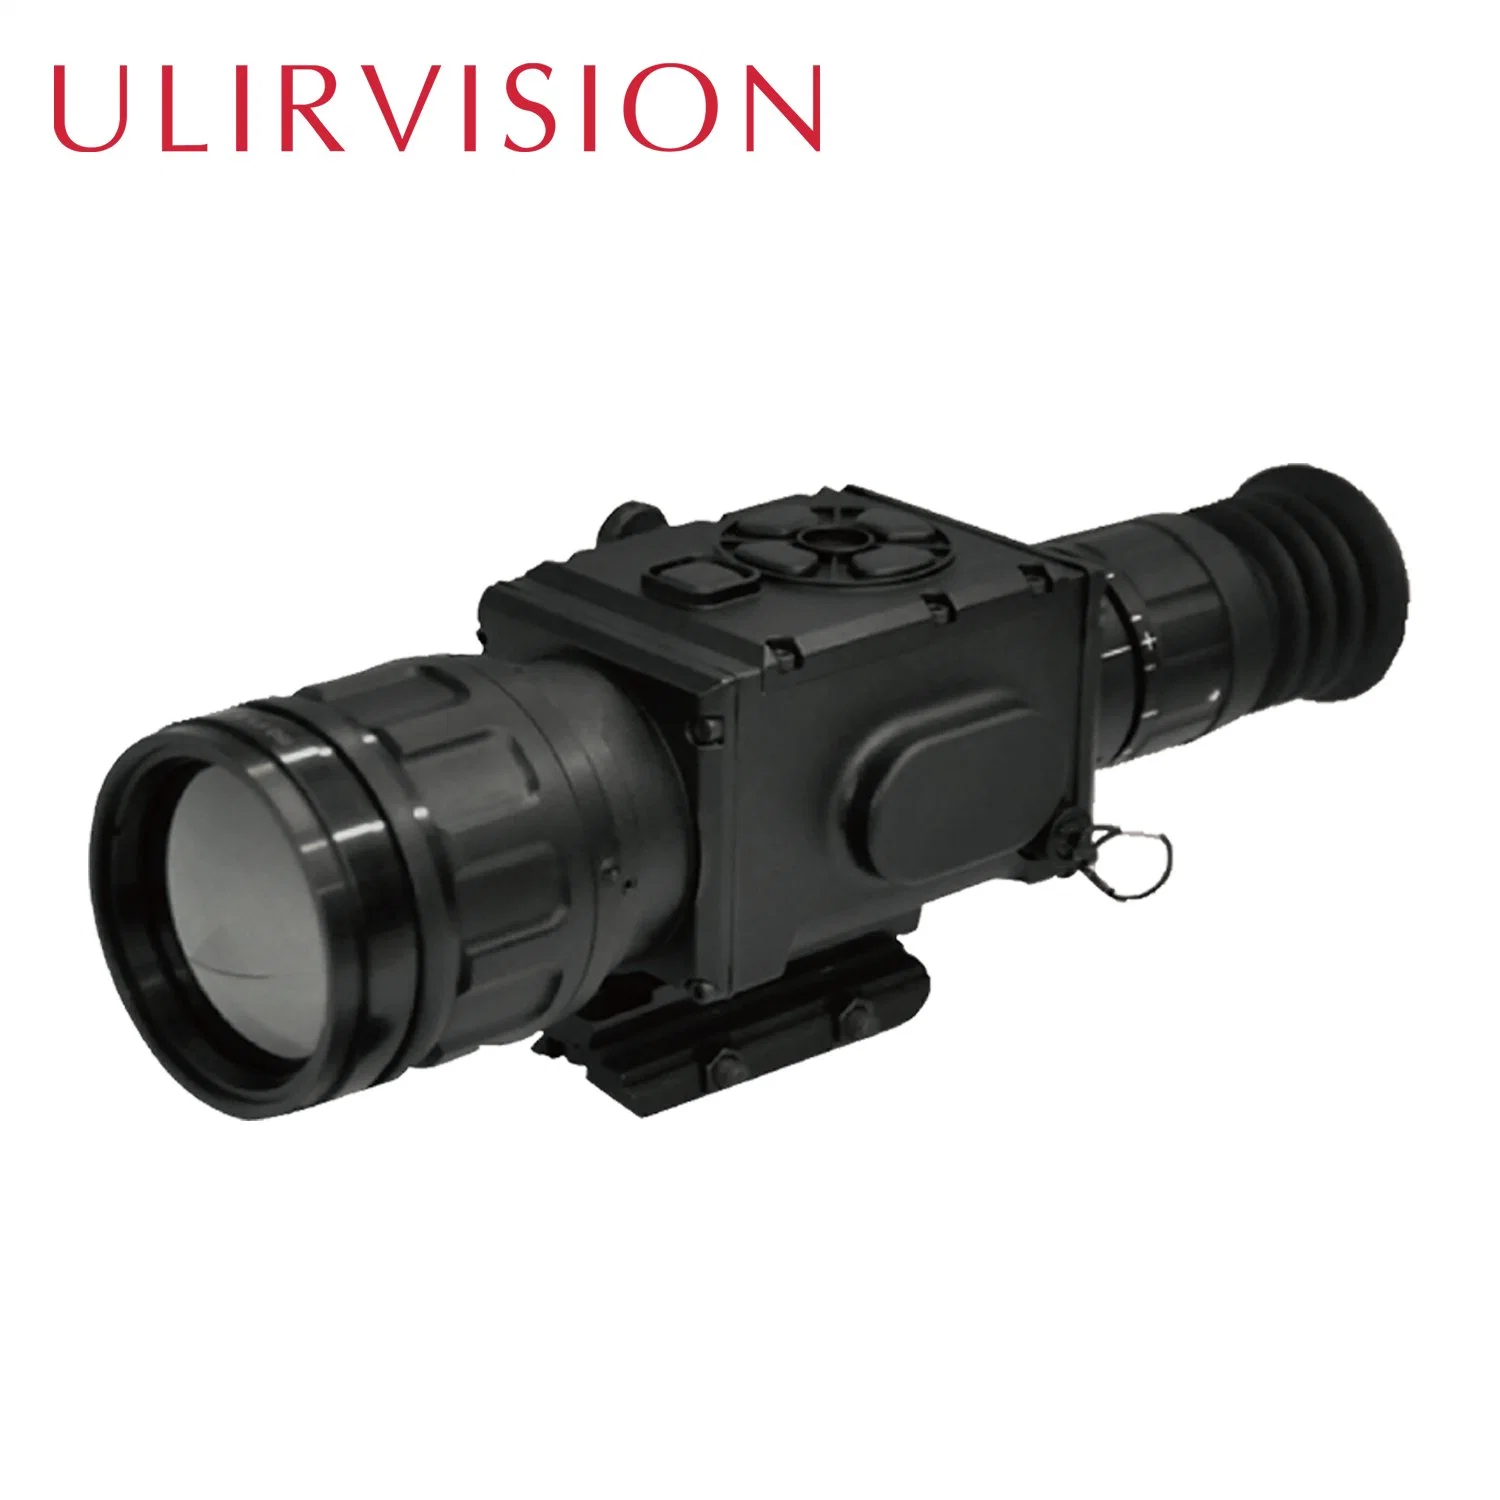 Shutterless Technology Thermal Imgaing Sight Infrared Vision for Law Enforcement, Hunting